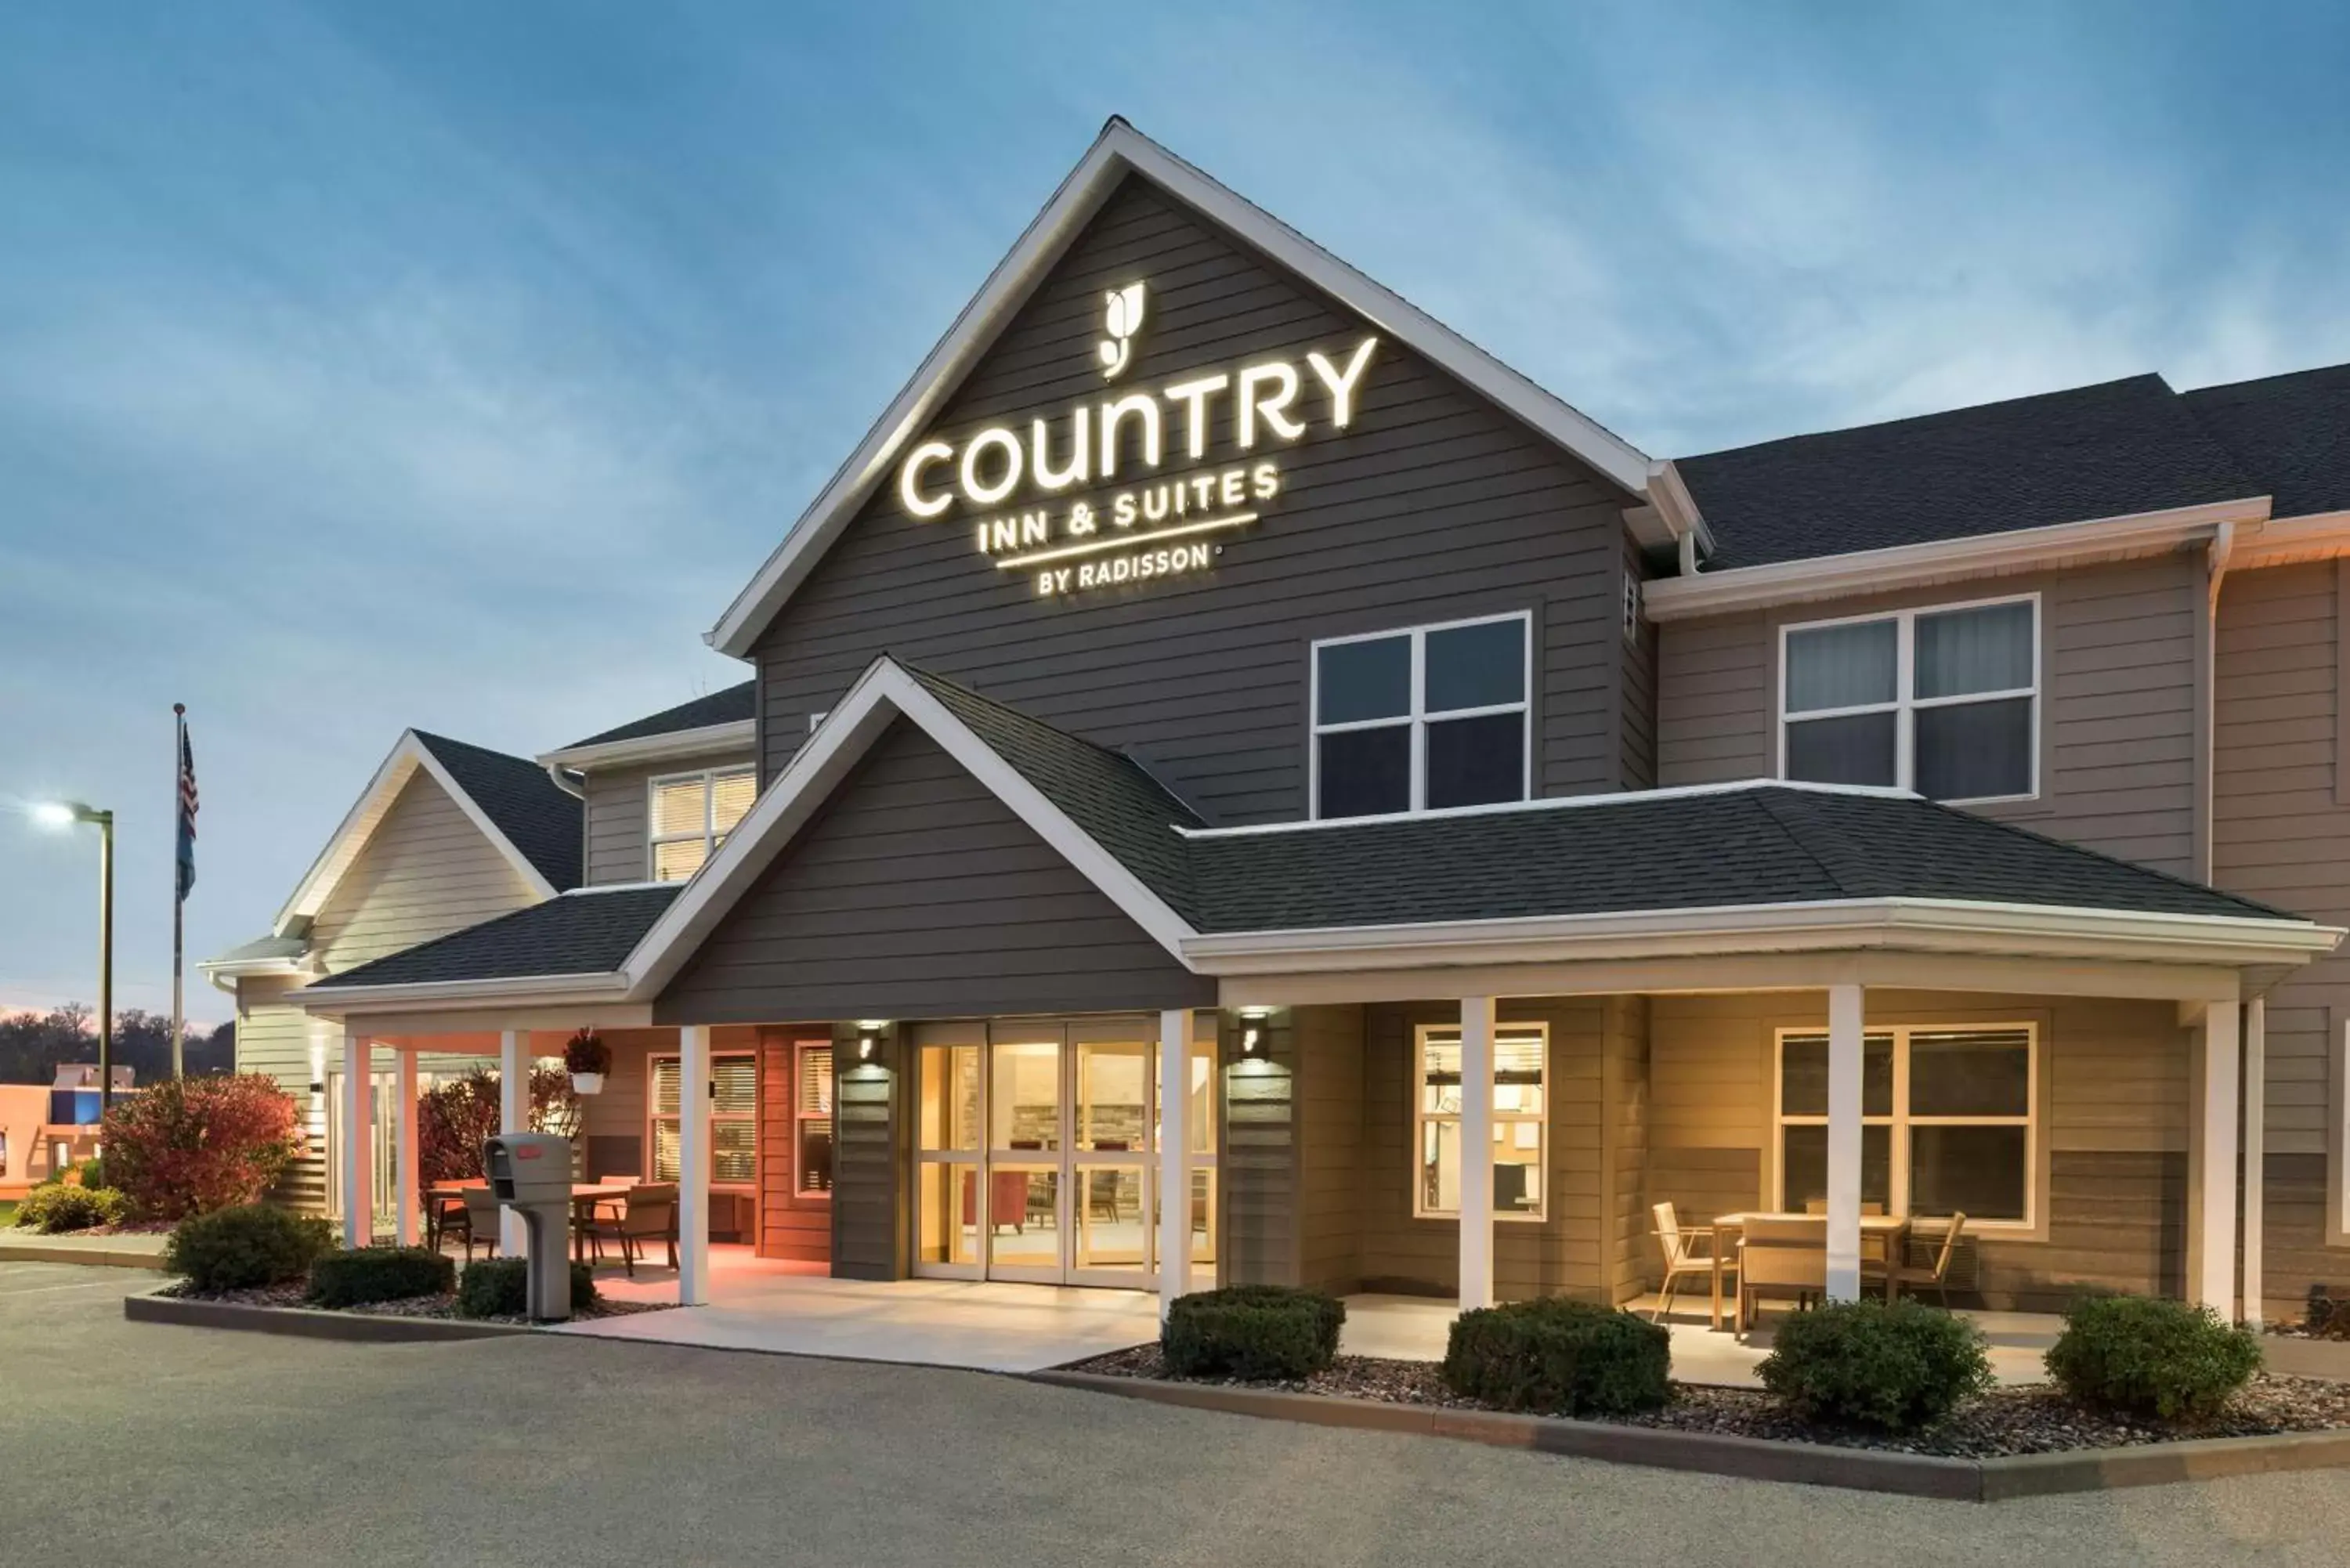 Property building in Country Inn & Suites by Radisson, Platteville, WI